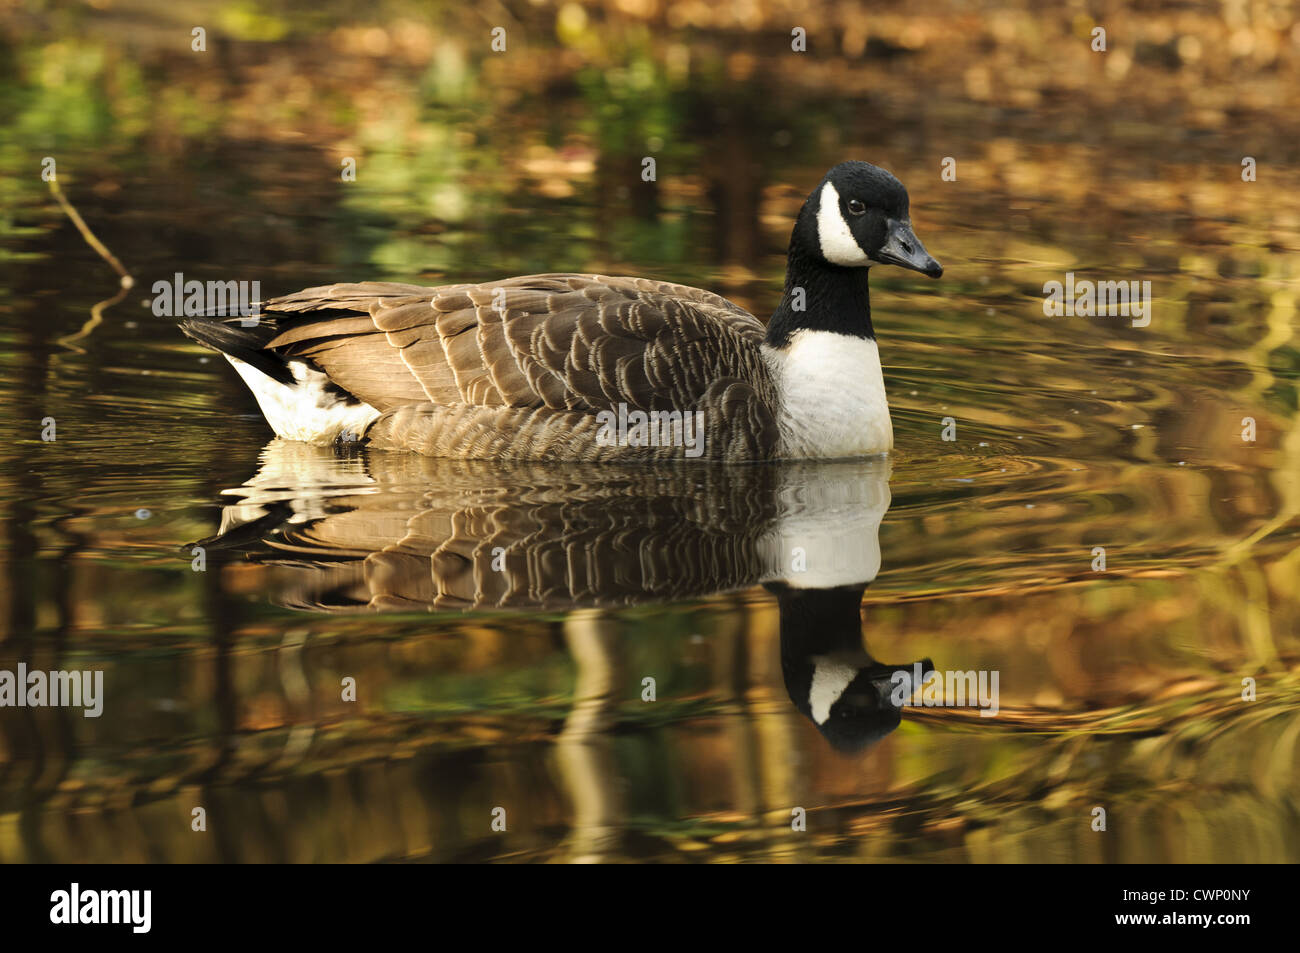 Canada Goose (Branta canadensis) introduced species, adult, swimming with reflection, Hurst Pond, Hurst Woods, Bexley, Kent, Stock Photo